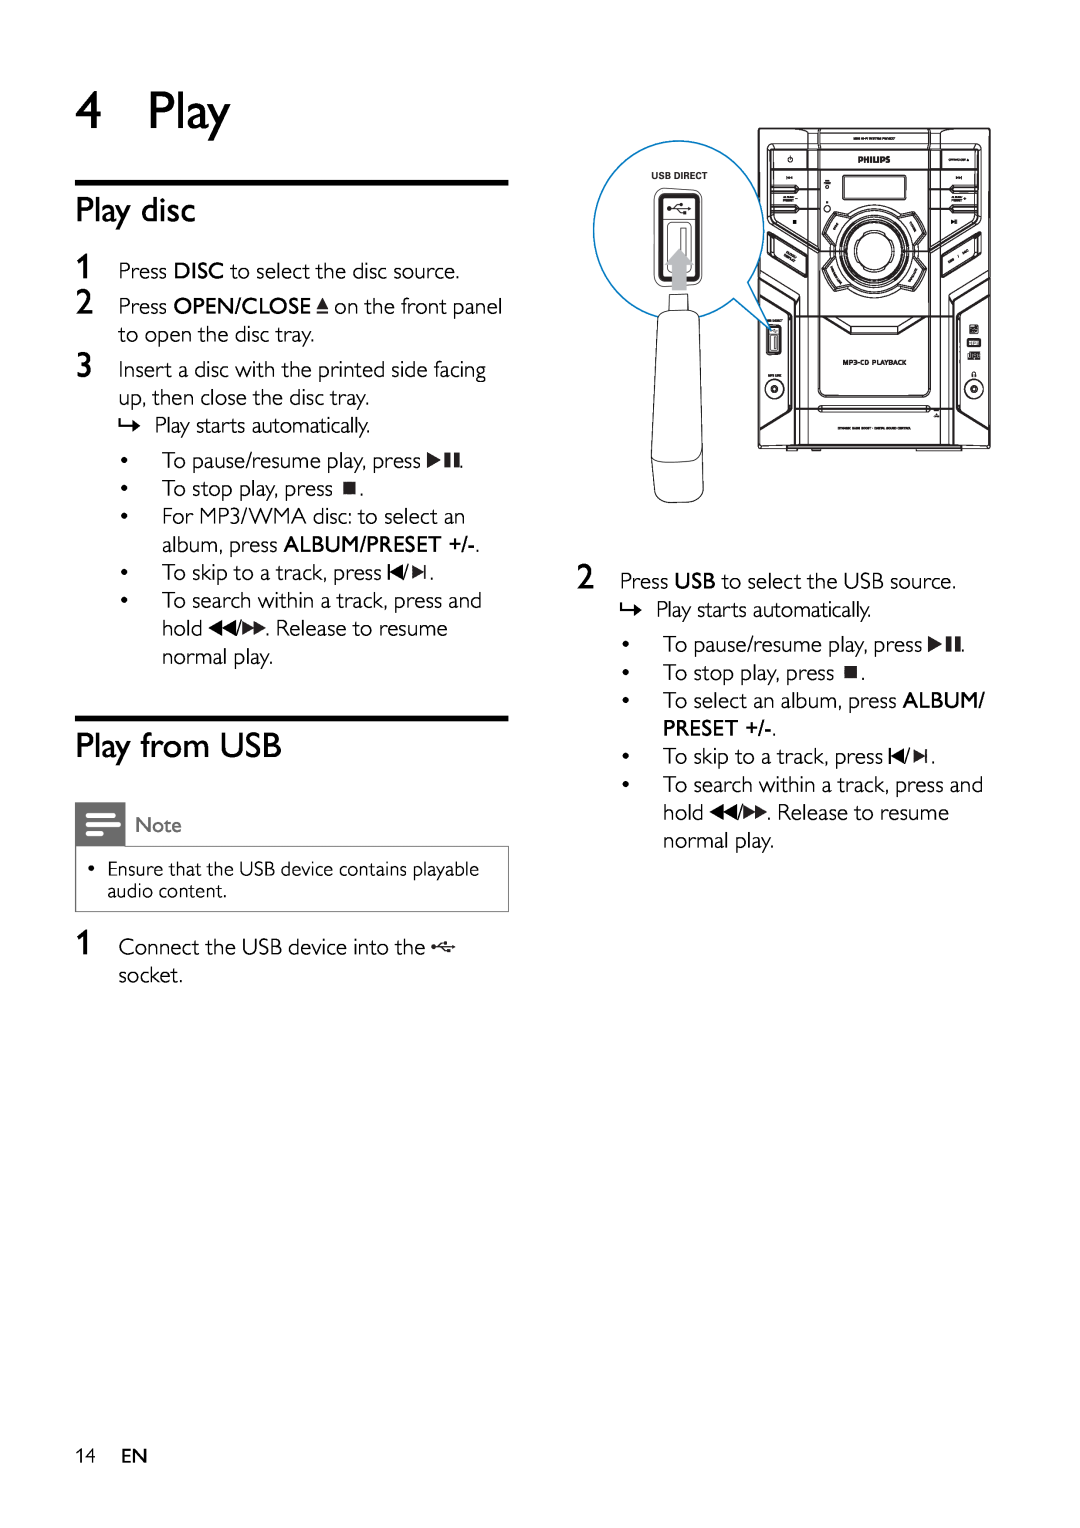 Philips FWM197/12 user manual Play disc, Play from USB 